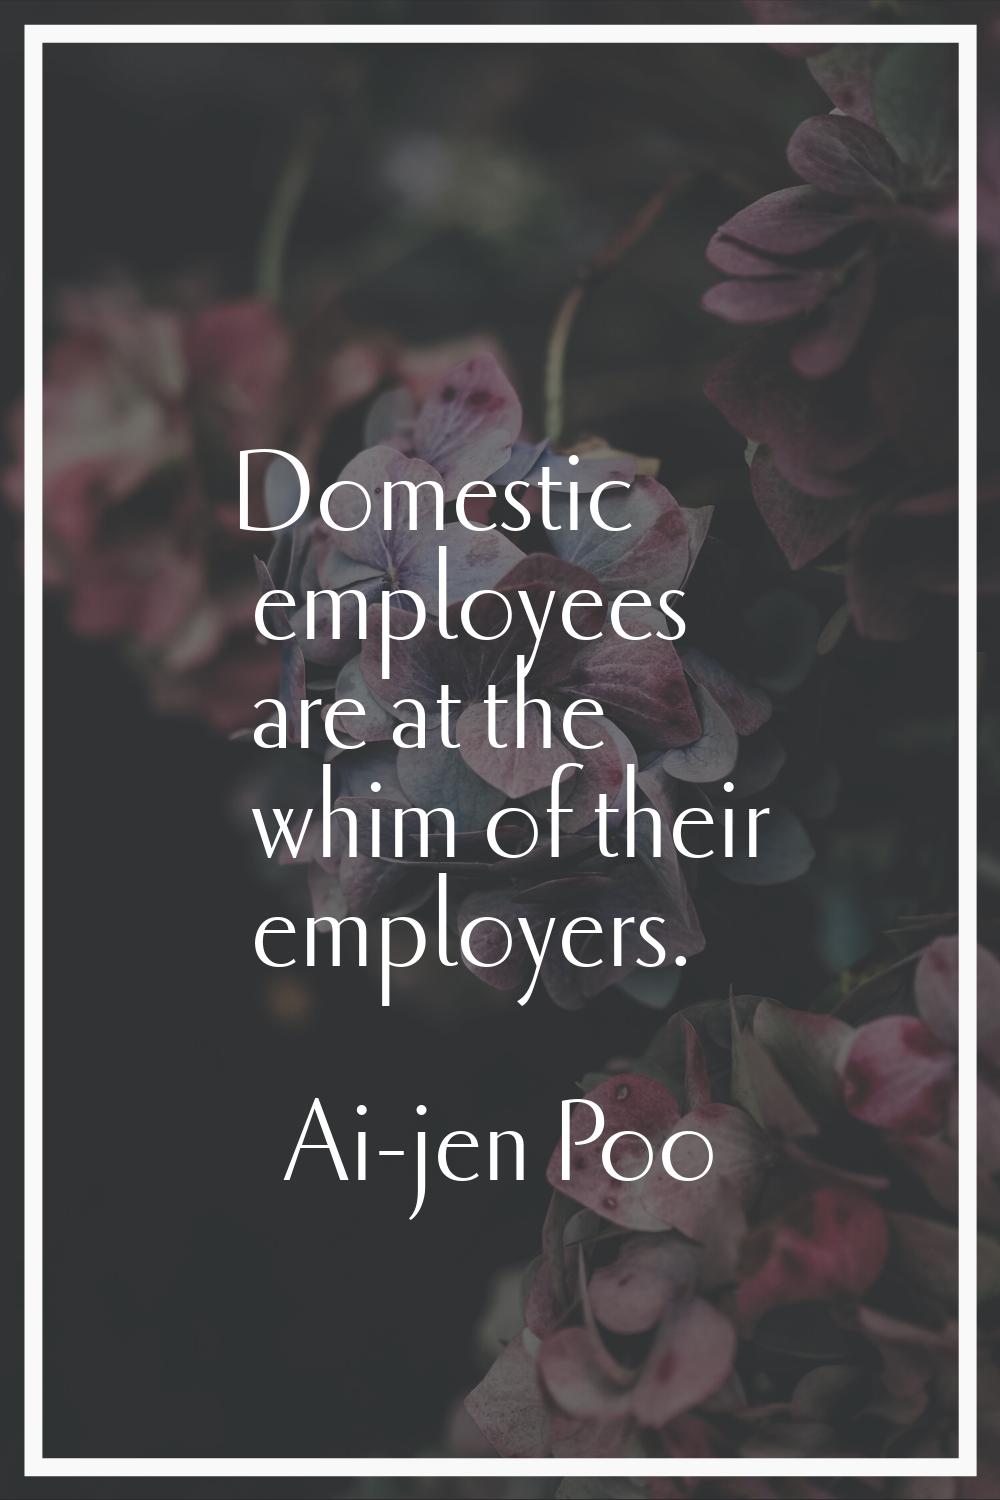 Domestic employees are at the whim of their employers.